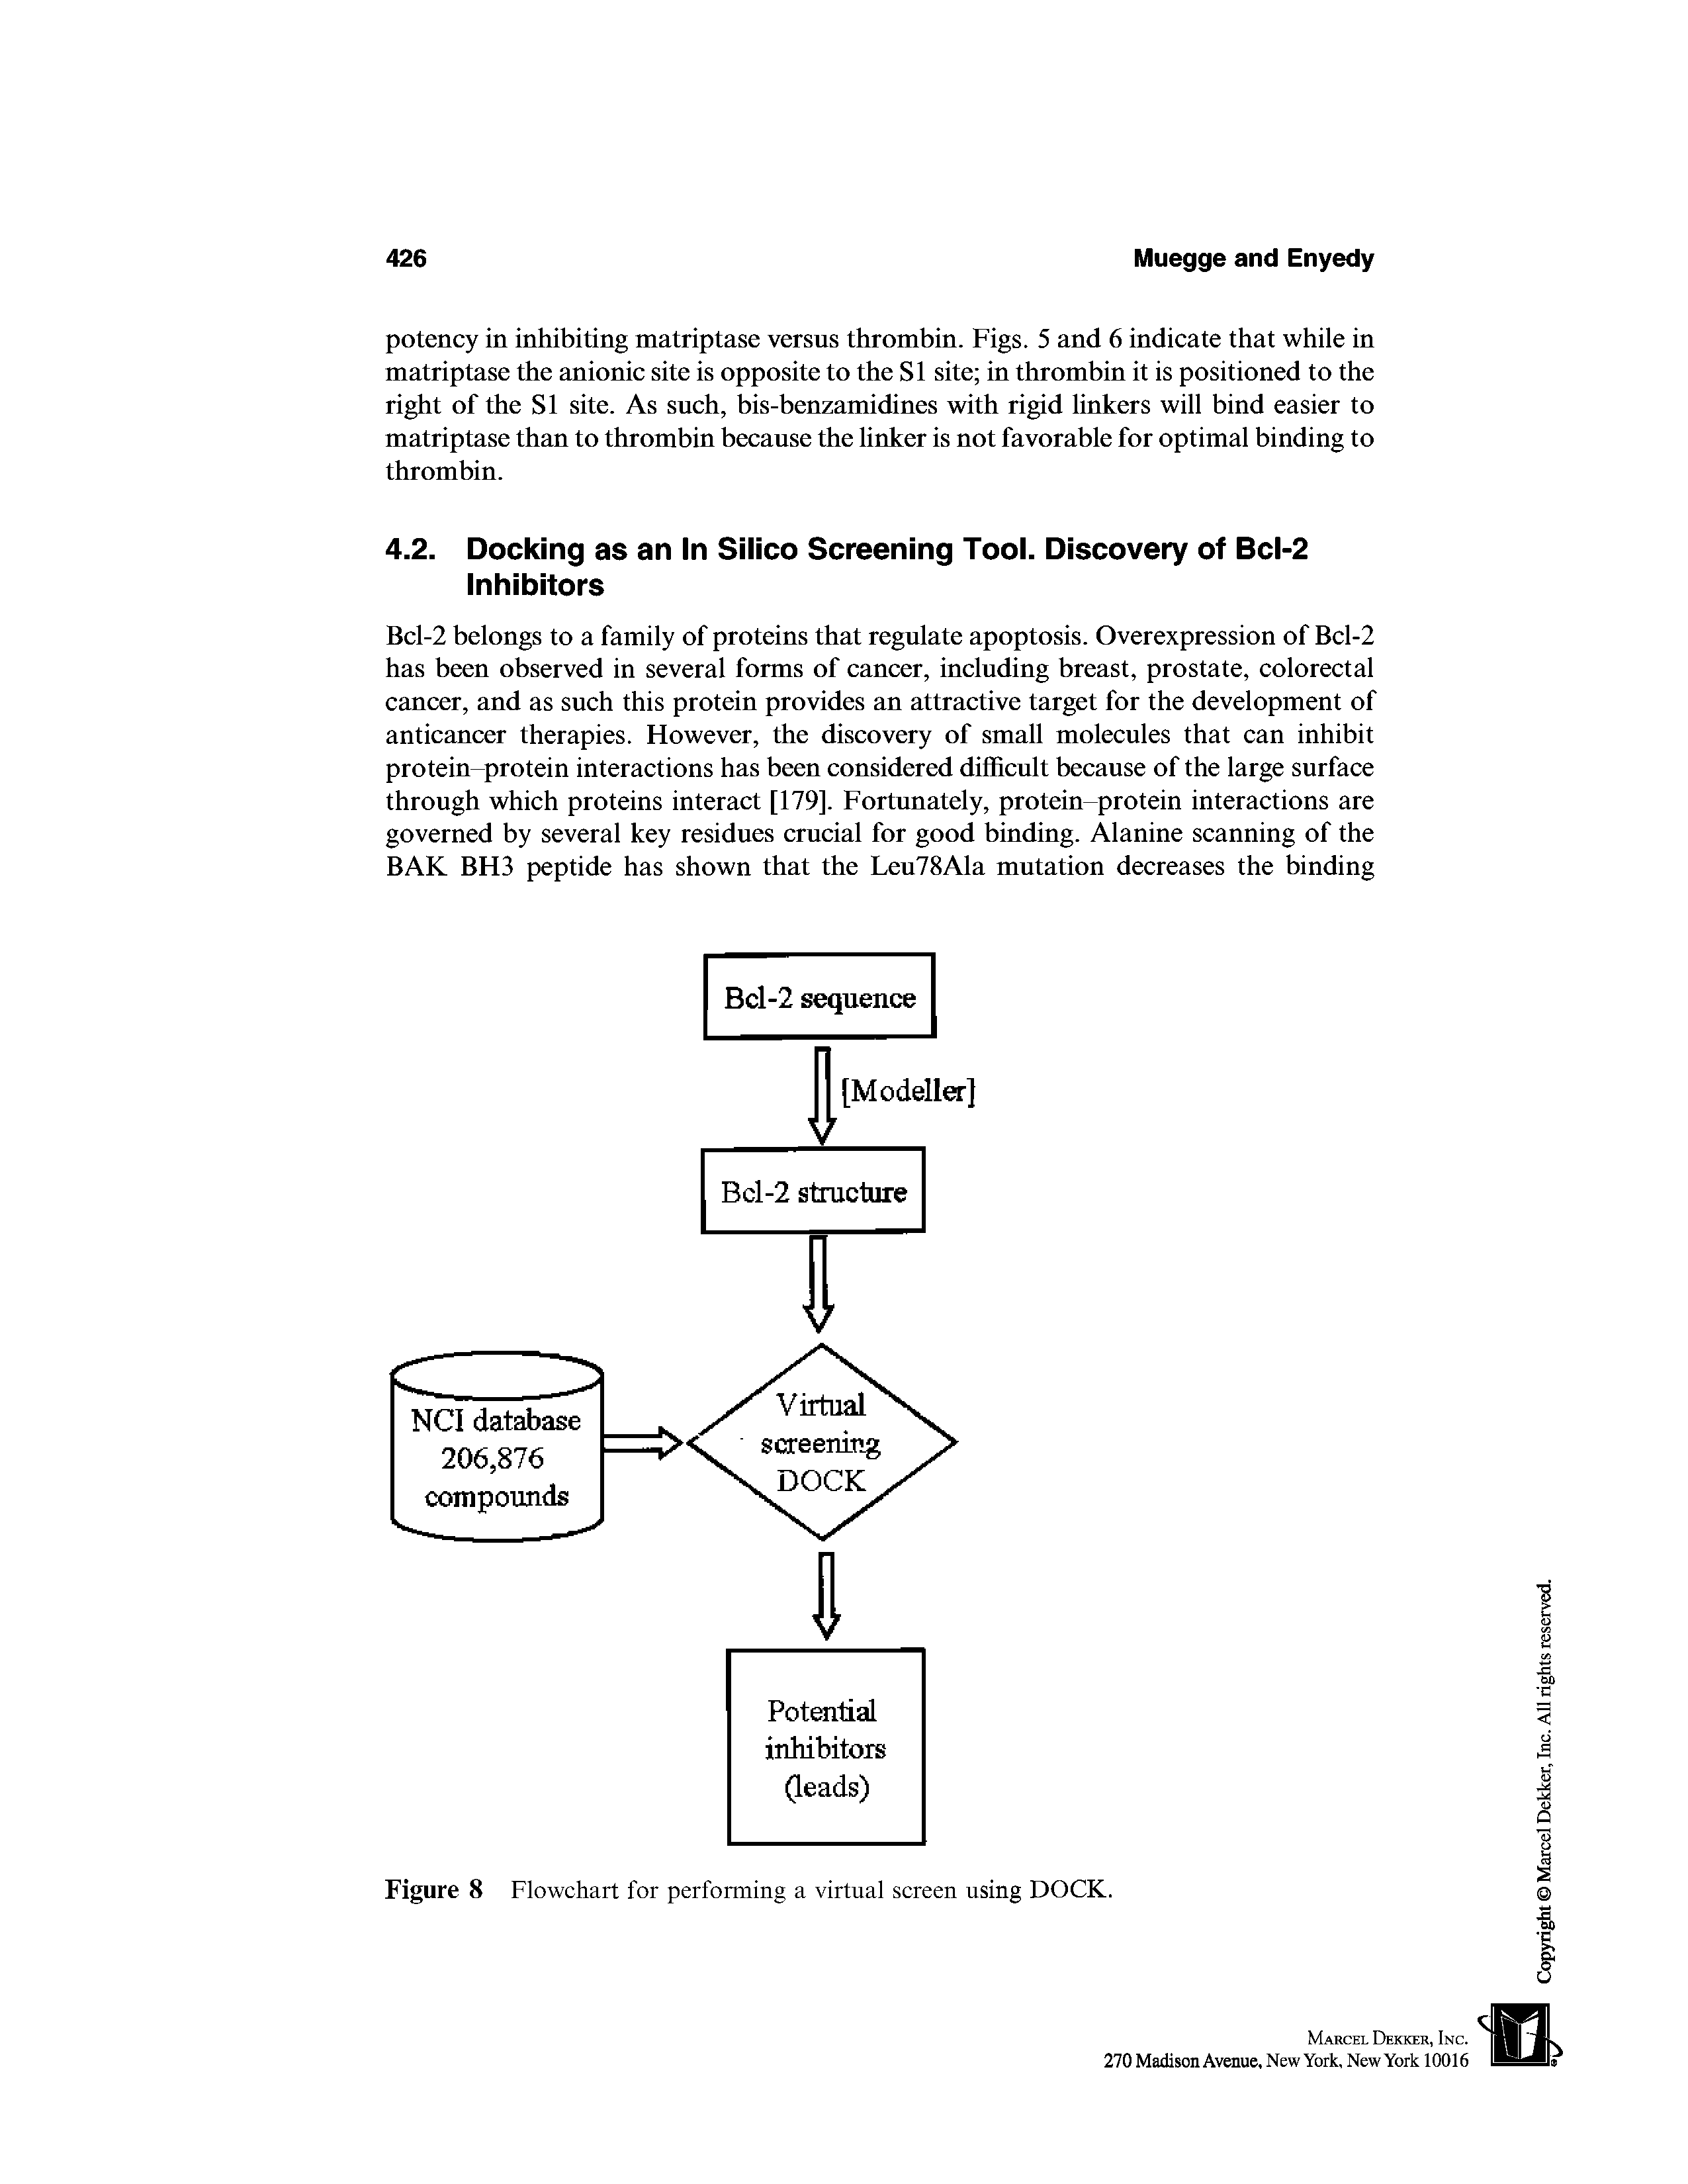 Figure 8 Flowchart for performing a virtual screen using DOCK.